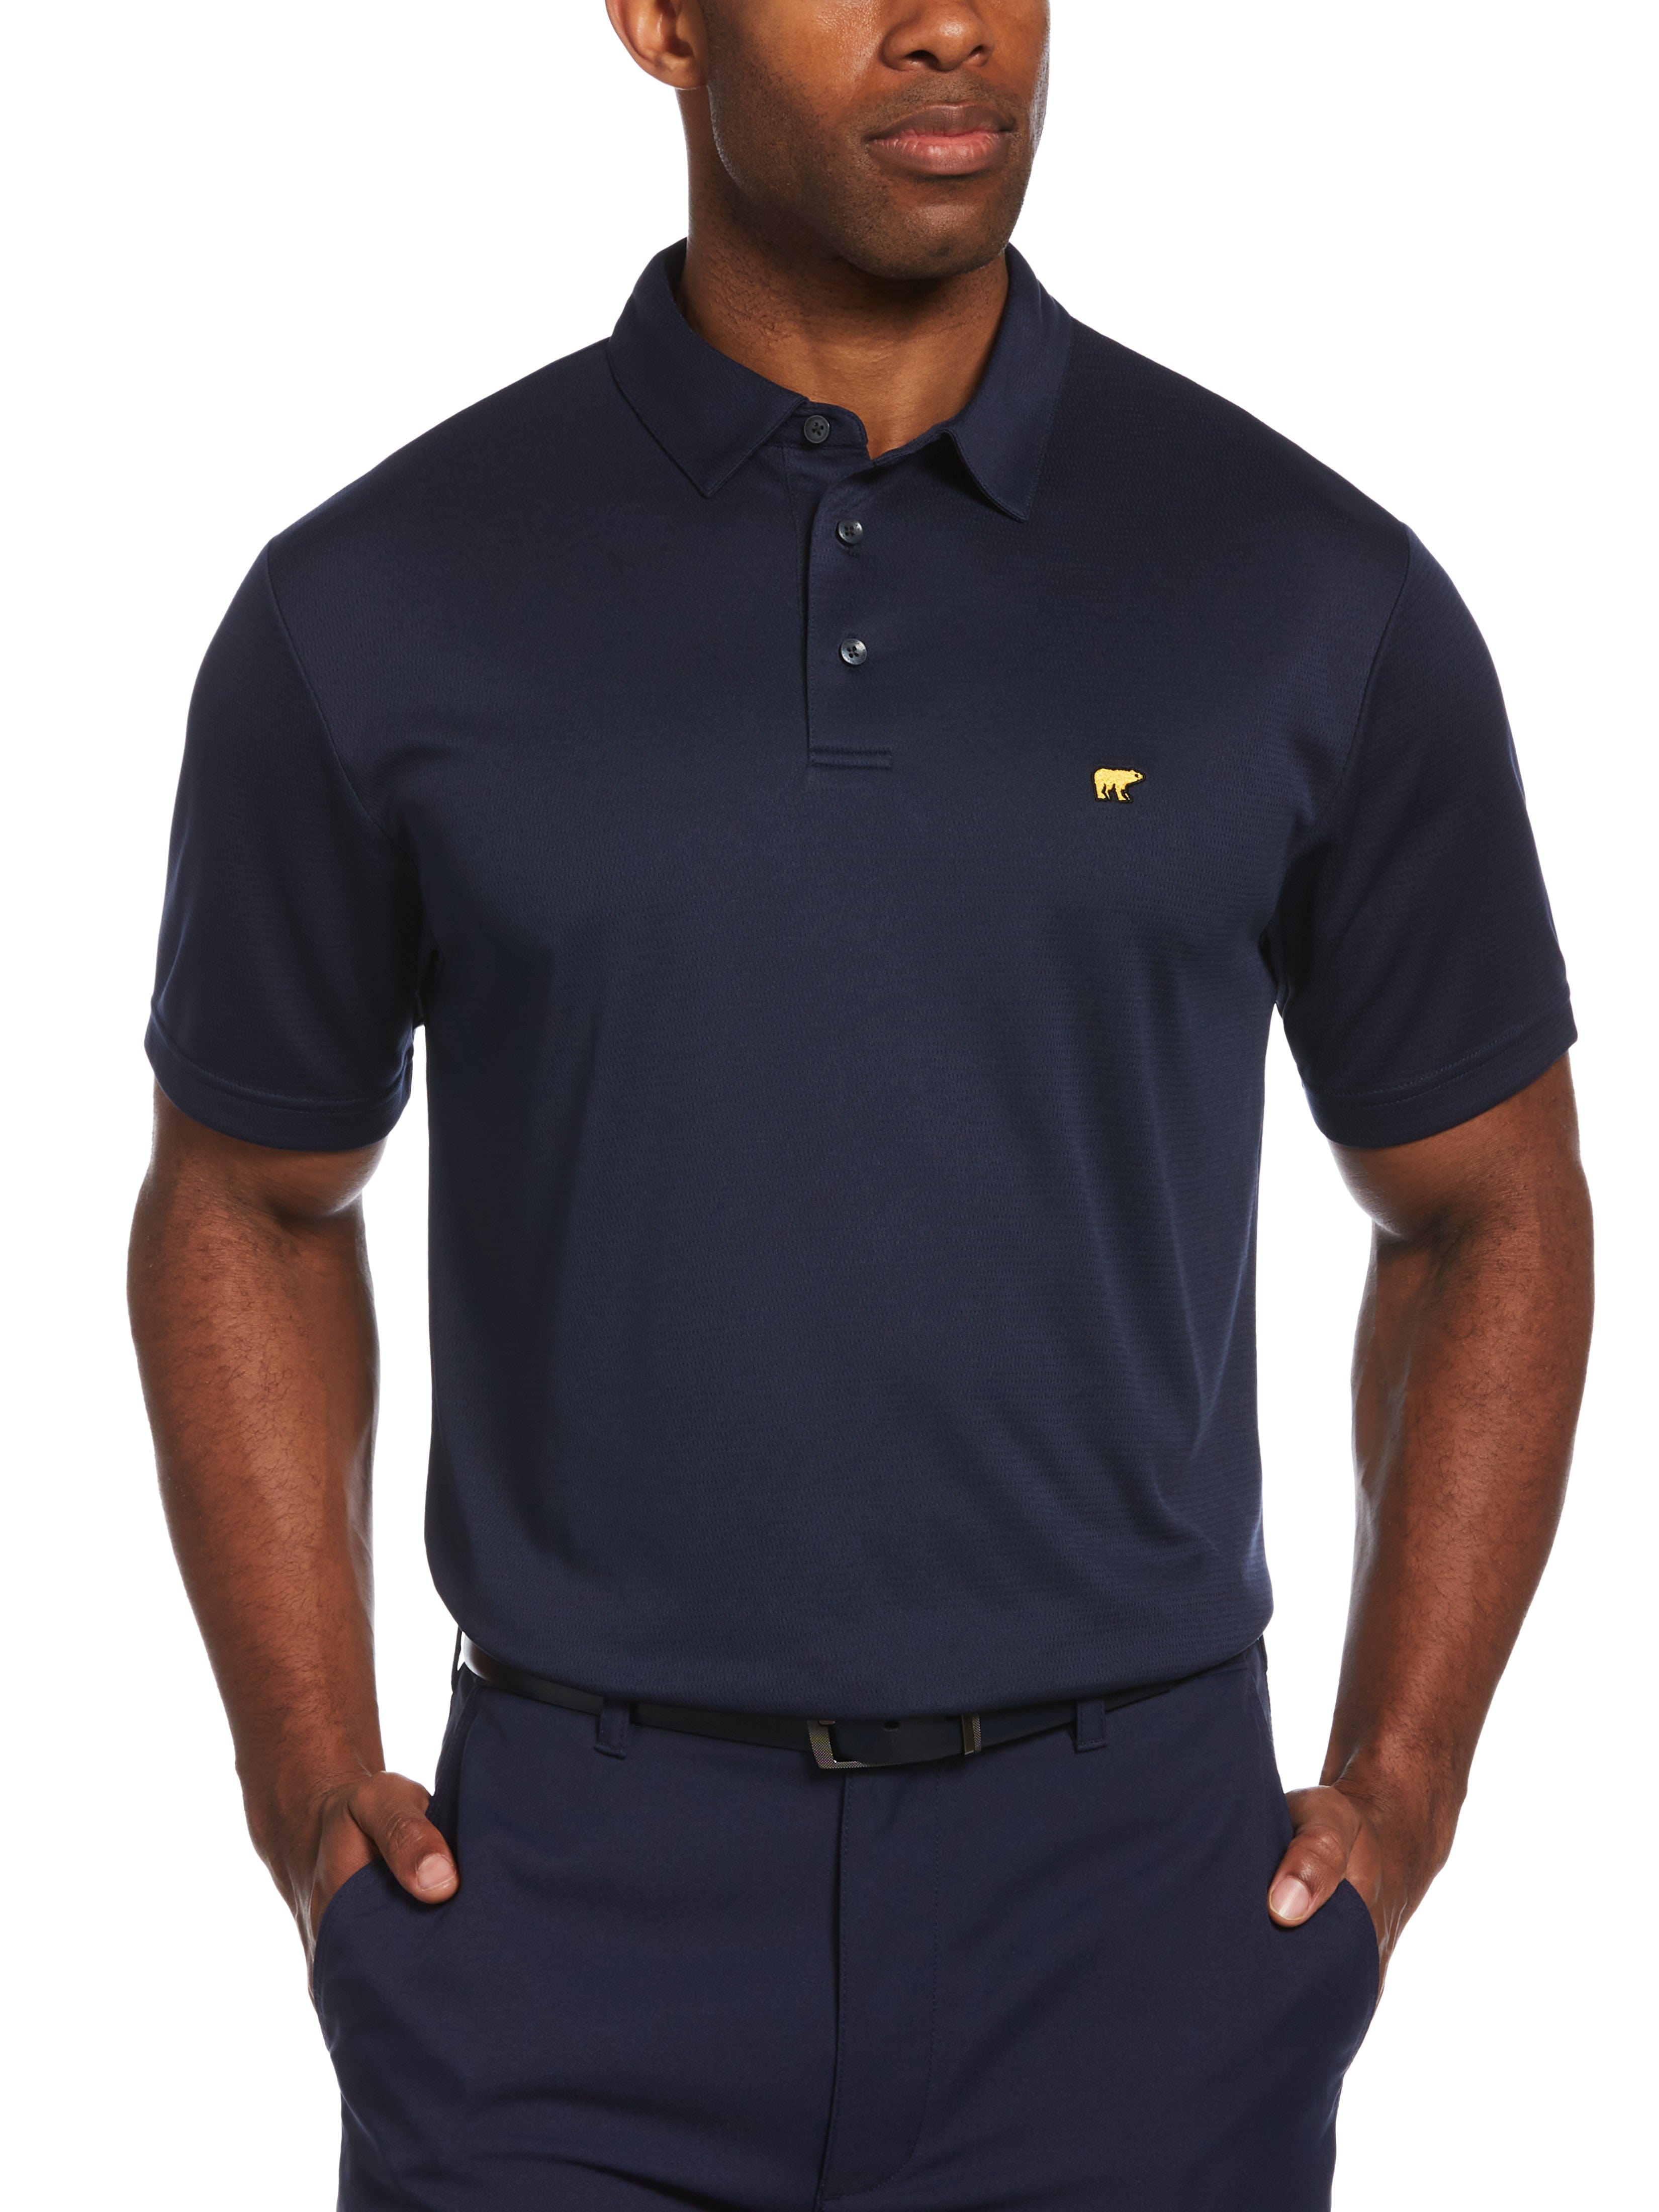 Jack Nicklaus Mens Solid Textured Golf Polo Shirt, Size Large, Classic Navy Blue, 100% Polyester | Golf Apparel Shop